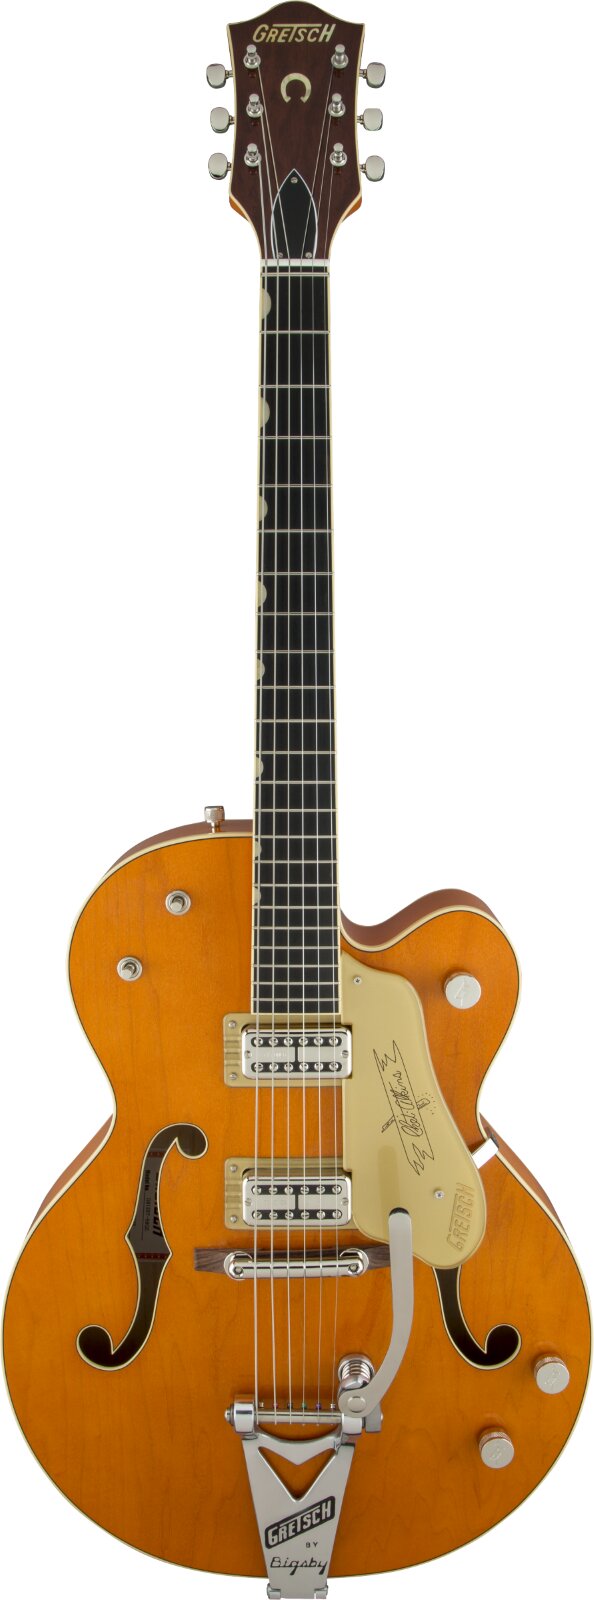 Gretsch G6120T-59 Vintage Select Edition 